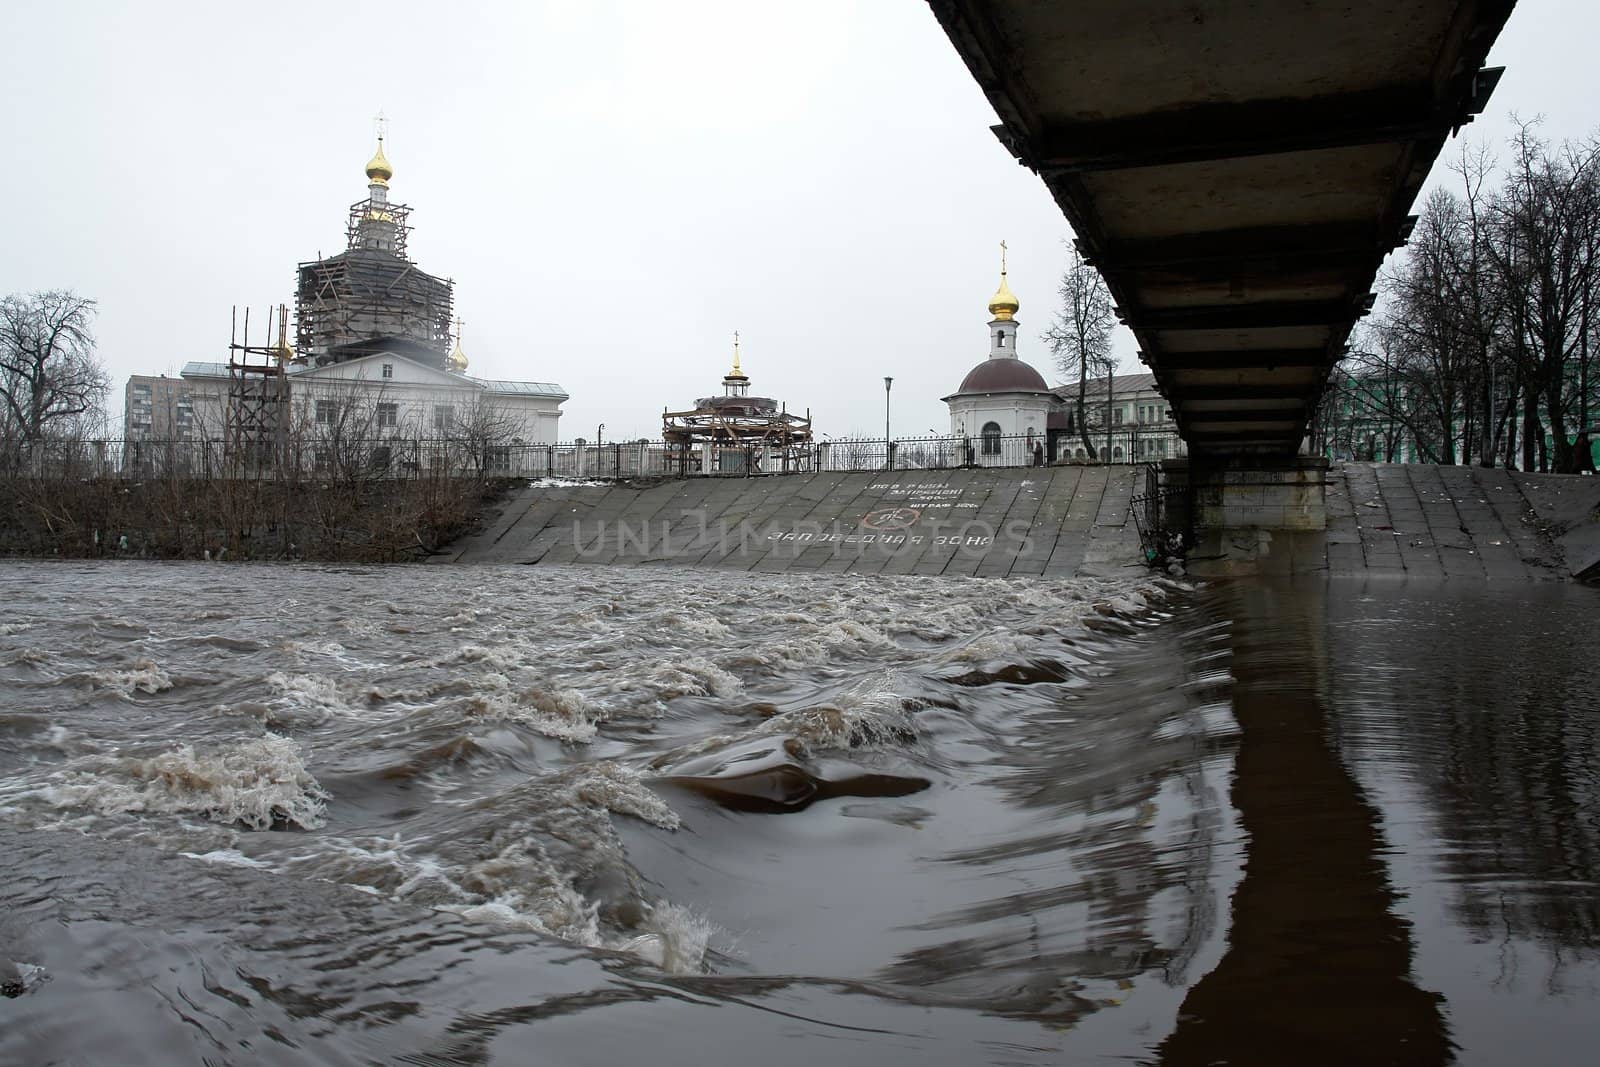 Spring tide. Orthodox church. Wiew from under the bridge.